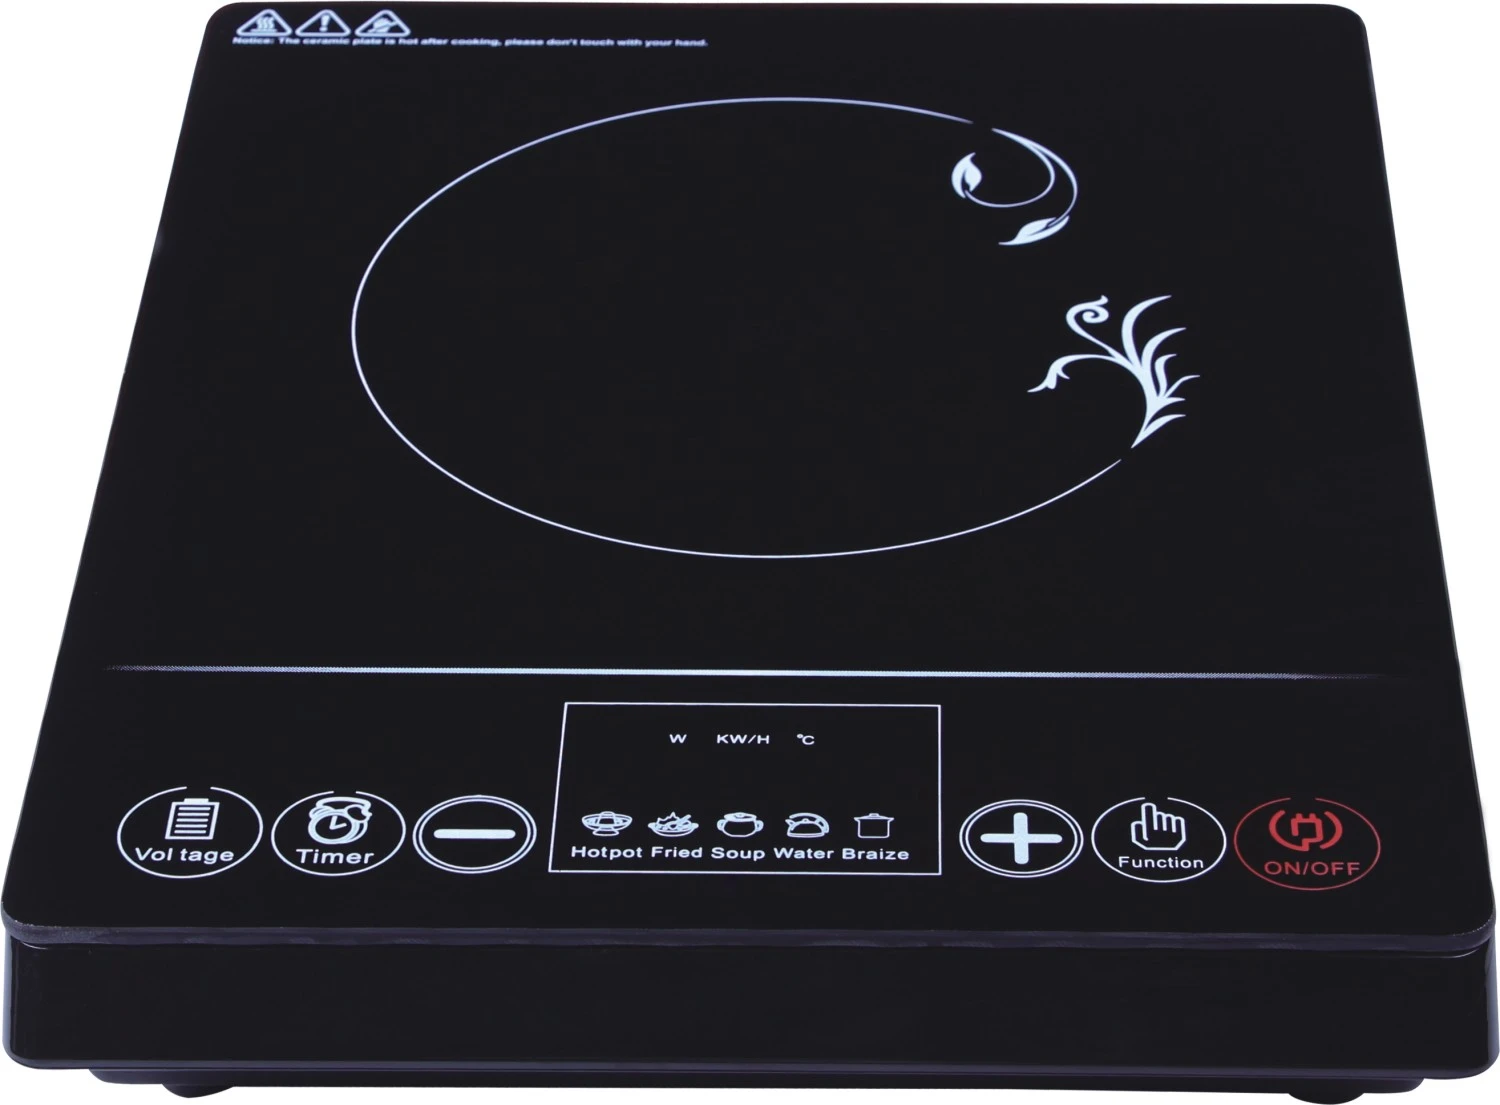 Portable Induction Cooktop 3500W Powerful Single Burner Electric Countertop Stove